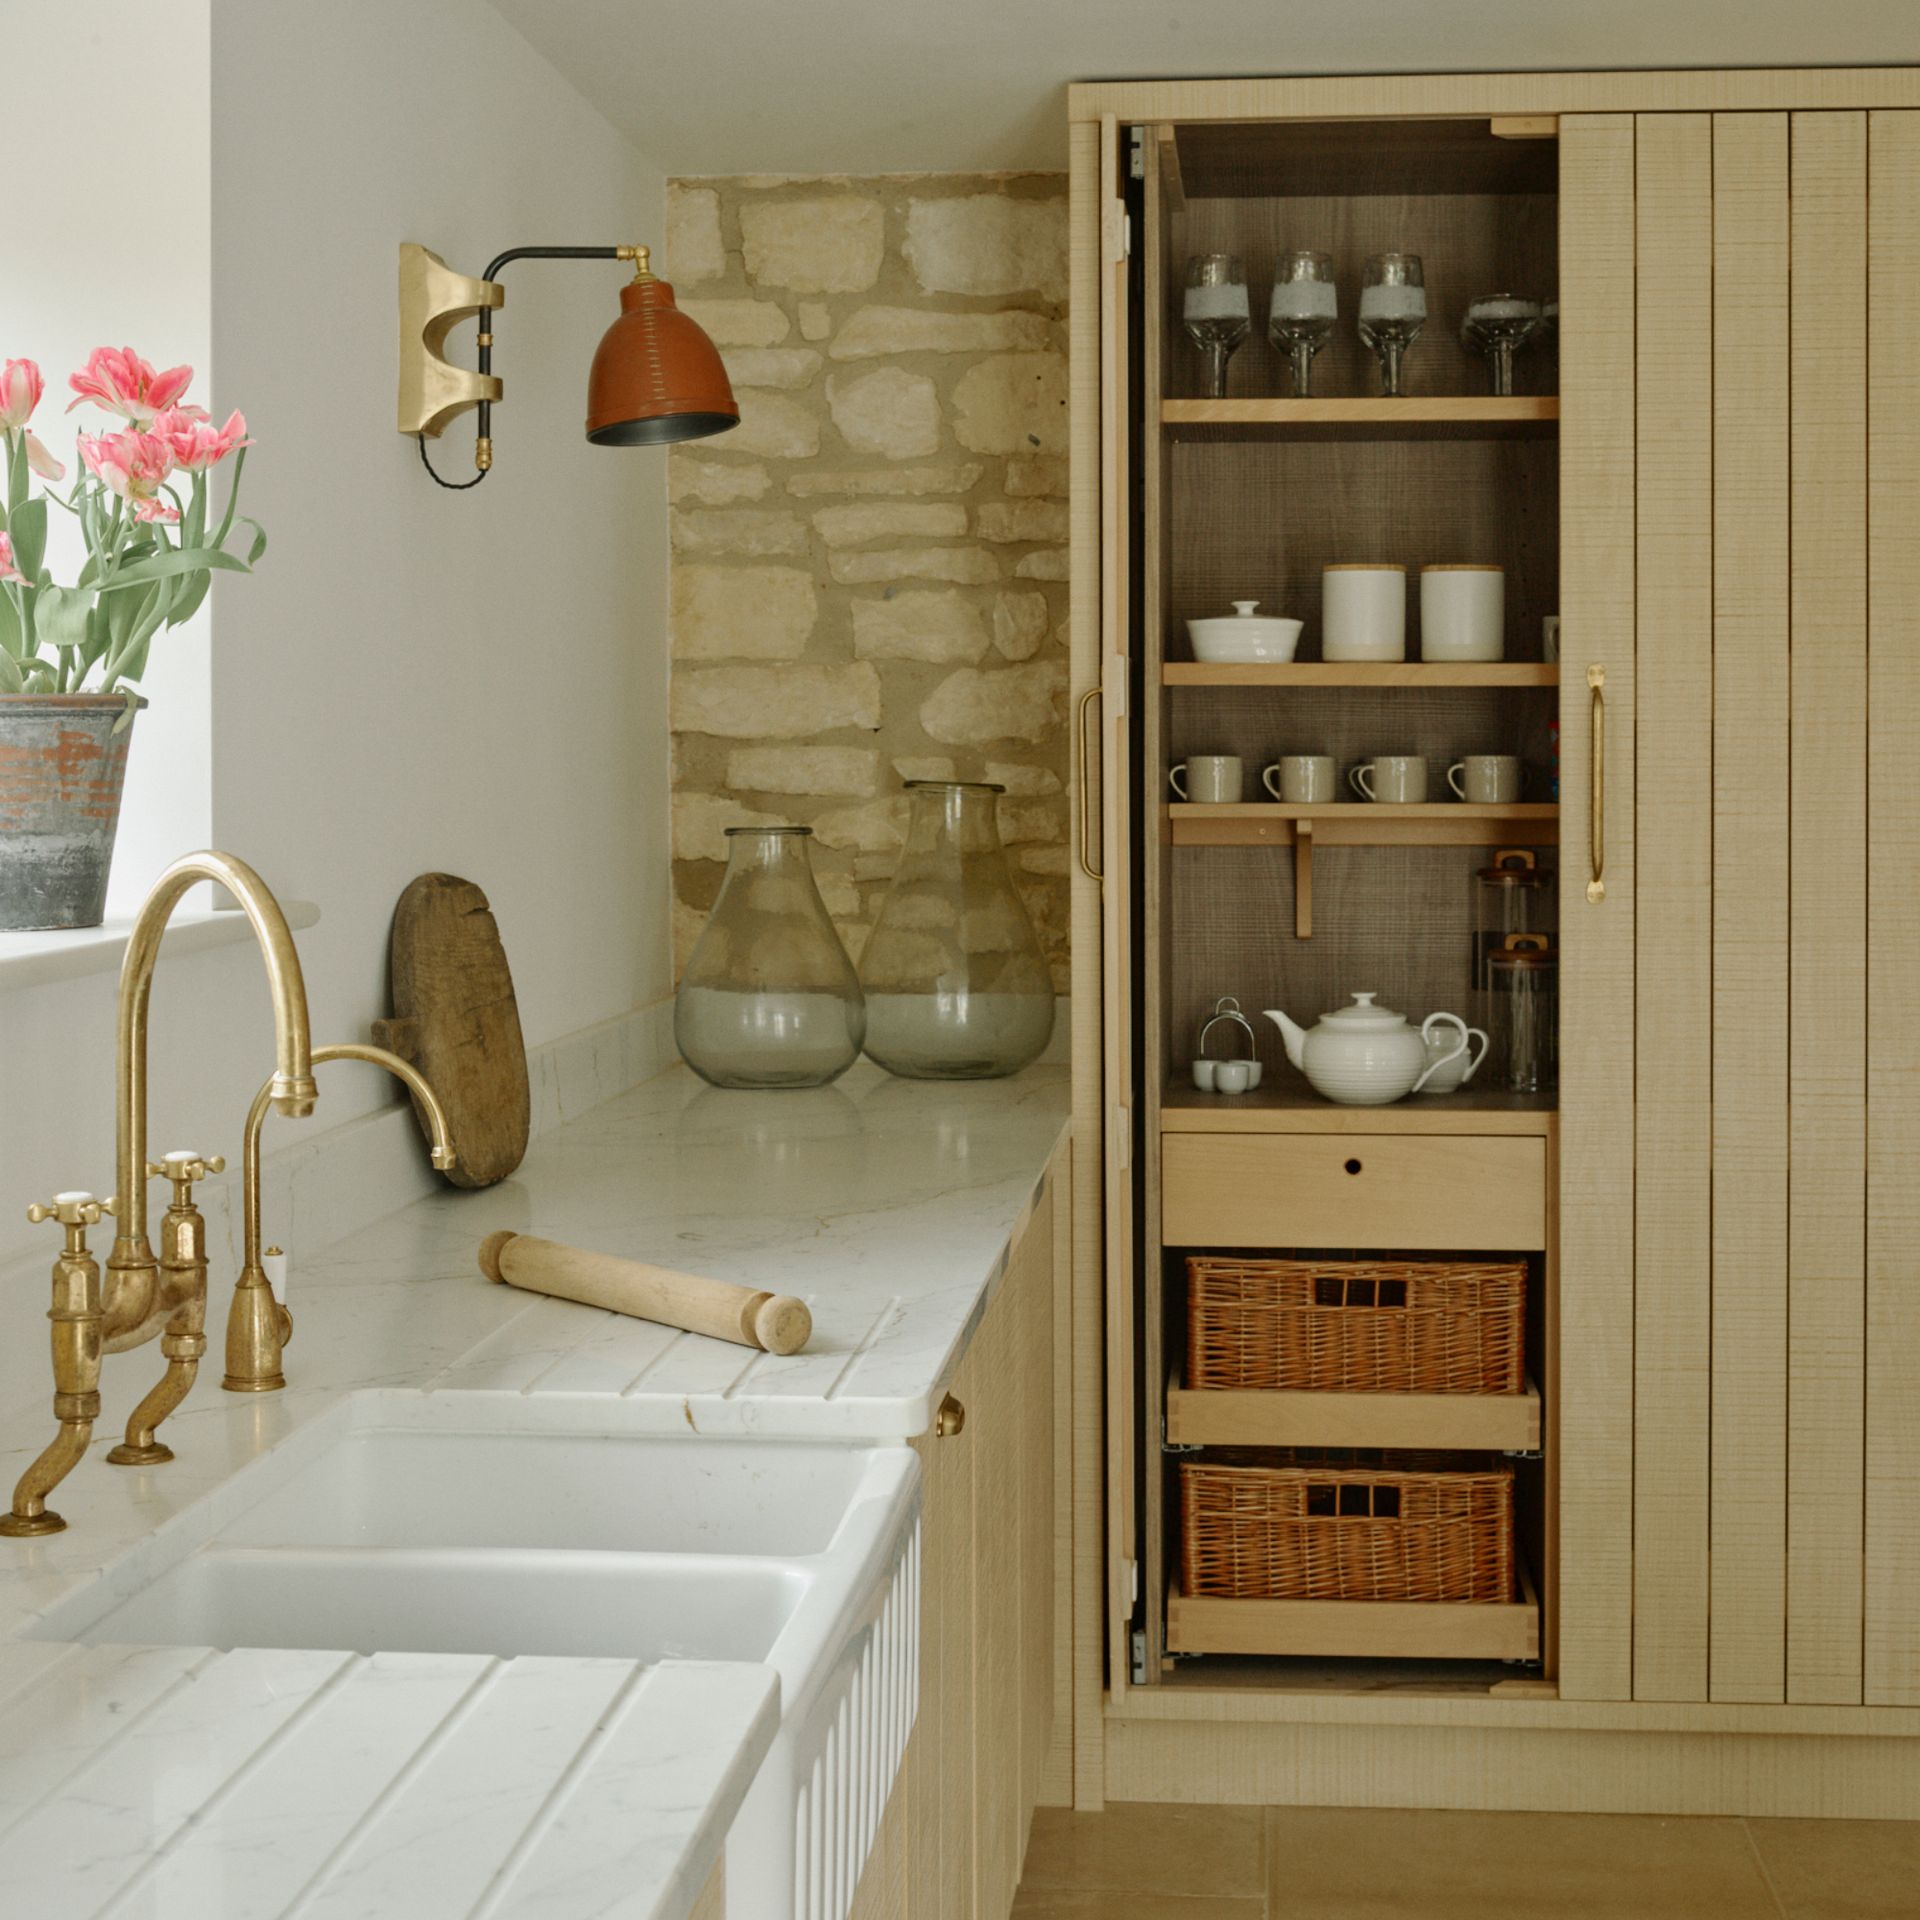 <p>                     As well as natural elements you can add there's also those key pieces like a larder or pantry that most definitely invoke the country kitchen style.                   </p>                                      <p>                     'A larder is an integral part of any country kitchen,' says Lauren Gilbethorpe, founder of Lauren Gilbethorpe Interiors. 'Sliding doors are a practical solution and wicker baskets provide useful storage for spices, and other small items.'                   </p>